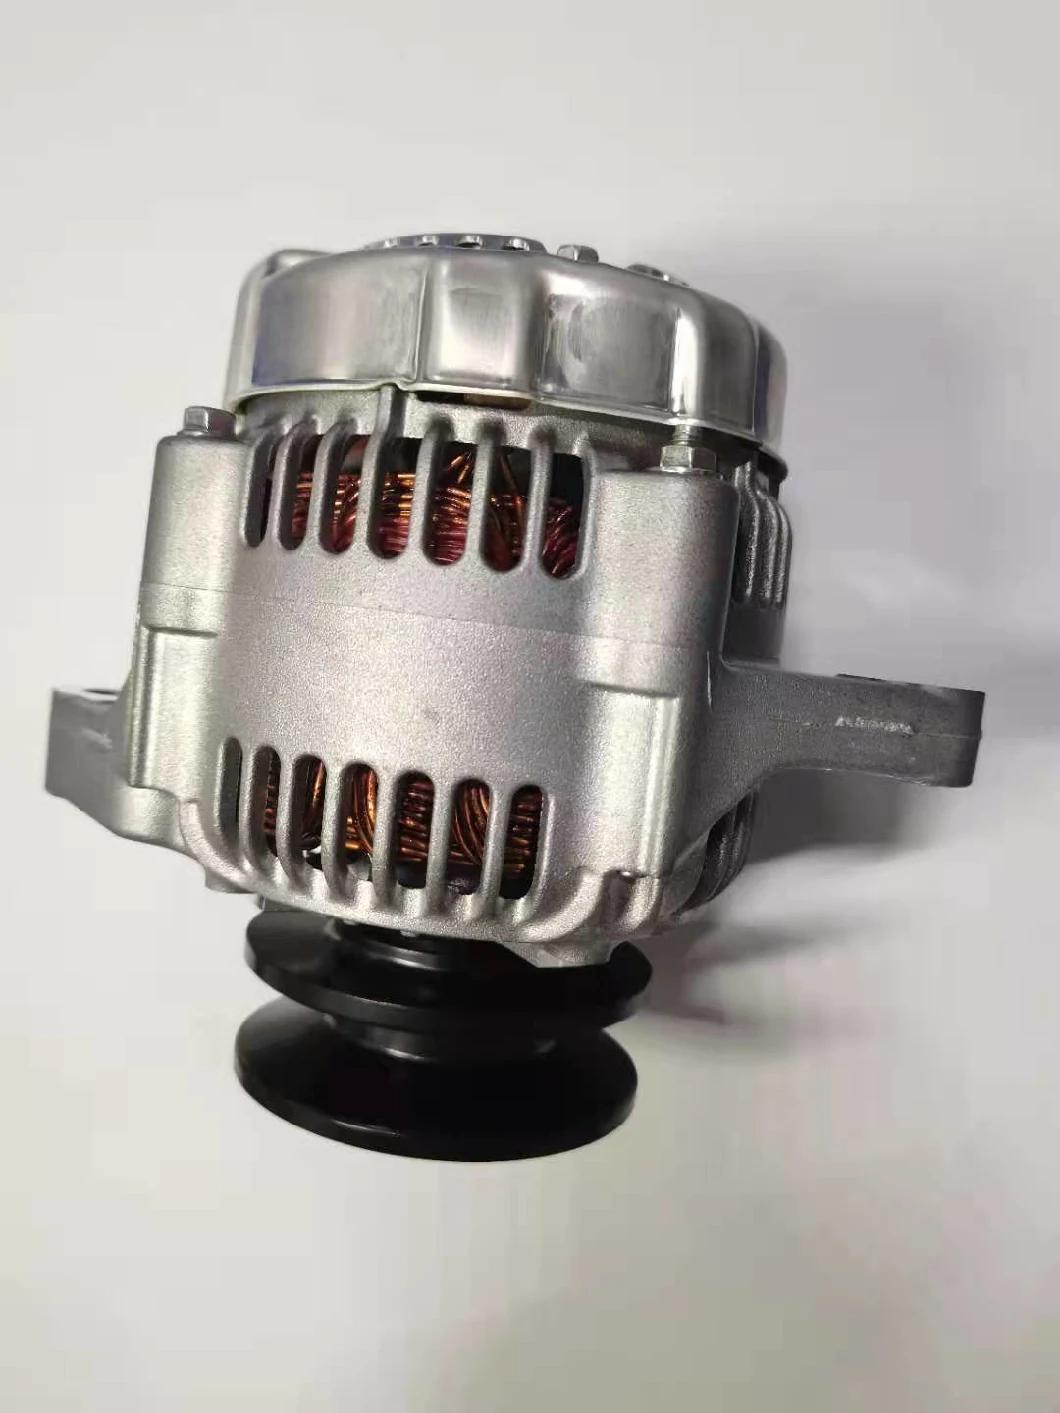 Construction Machinery Spare Parts 123951-77200 Sp115473 12V Alternator Generator for Engine on Loader 365A 375A 385A and 908 Excavator